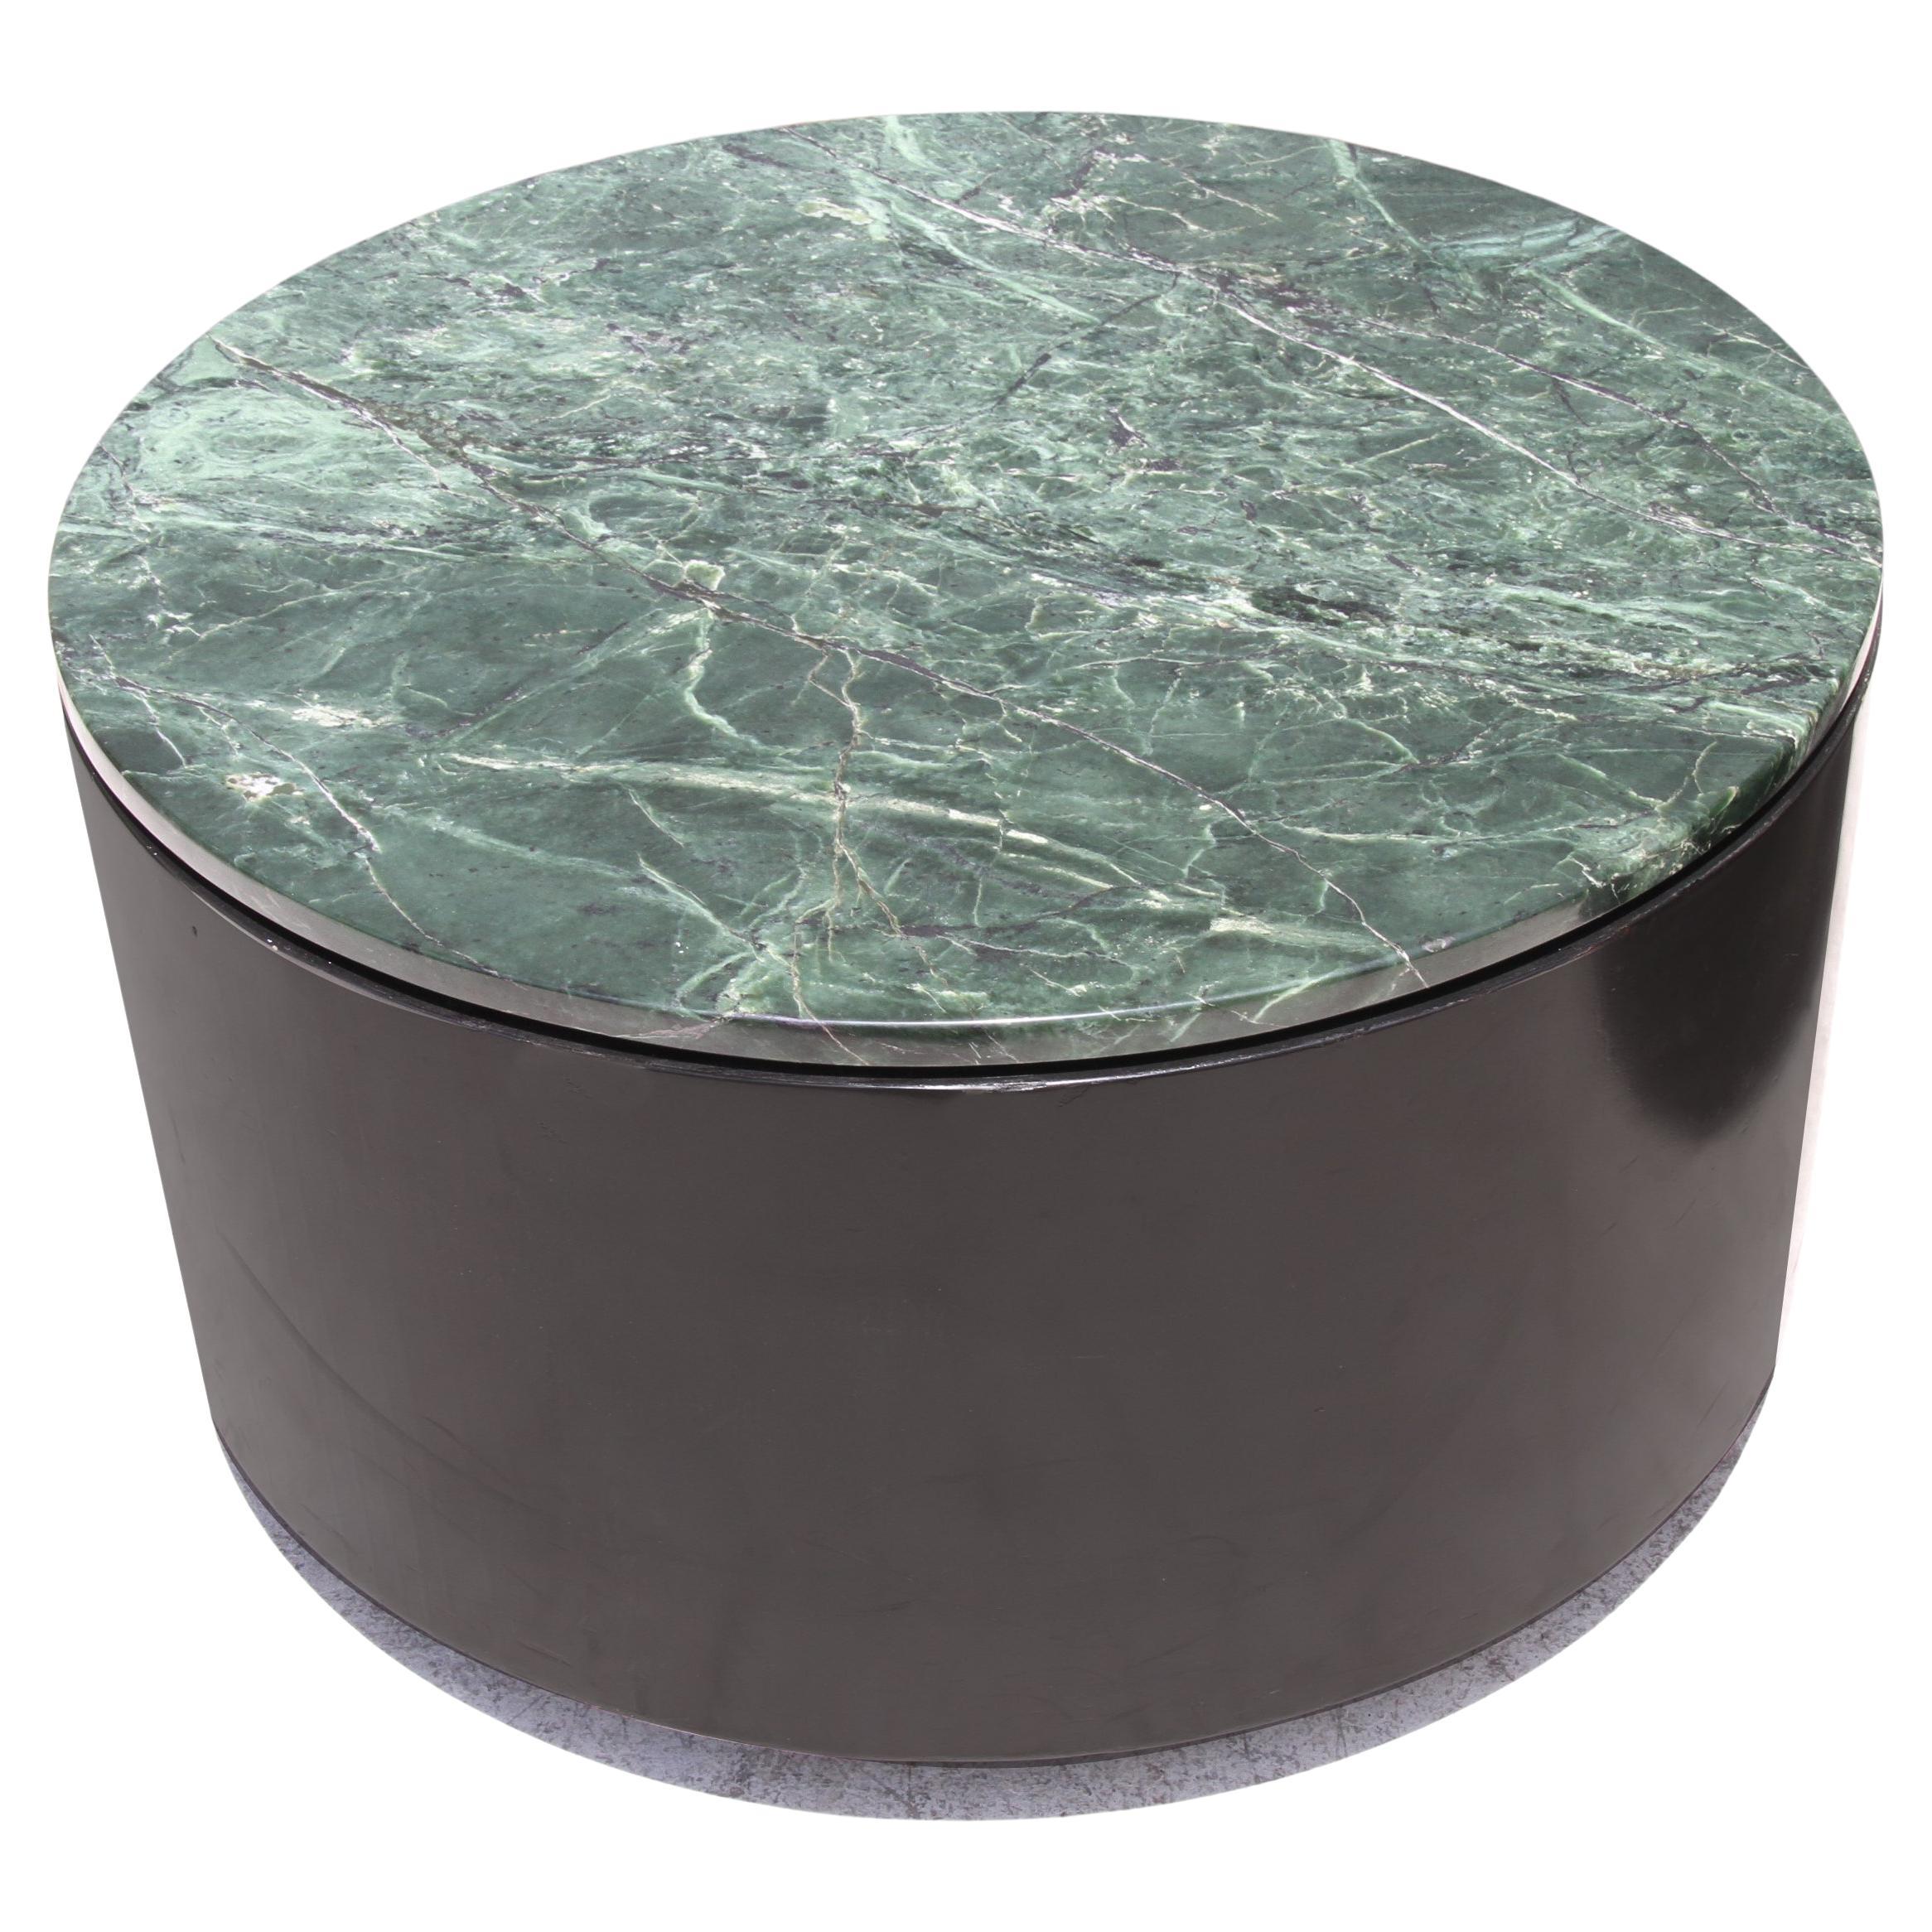 Mid-Century Modern Paul Mayen Style Green Marble Top Drum Side Table

Stunning vintage Paul Mayen style marble top cylinder drum side or end tables.
Richly marbeled with black and green veining.
2 Available.
Dimensions: 36